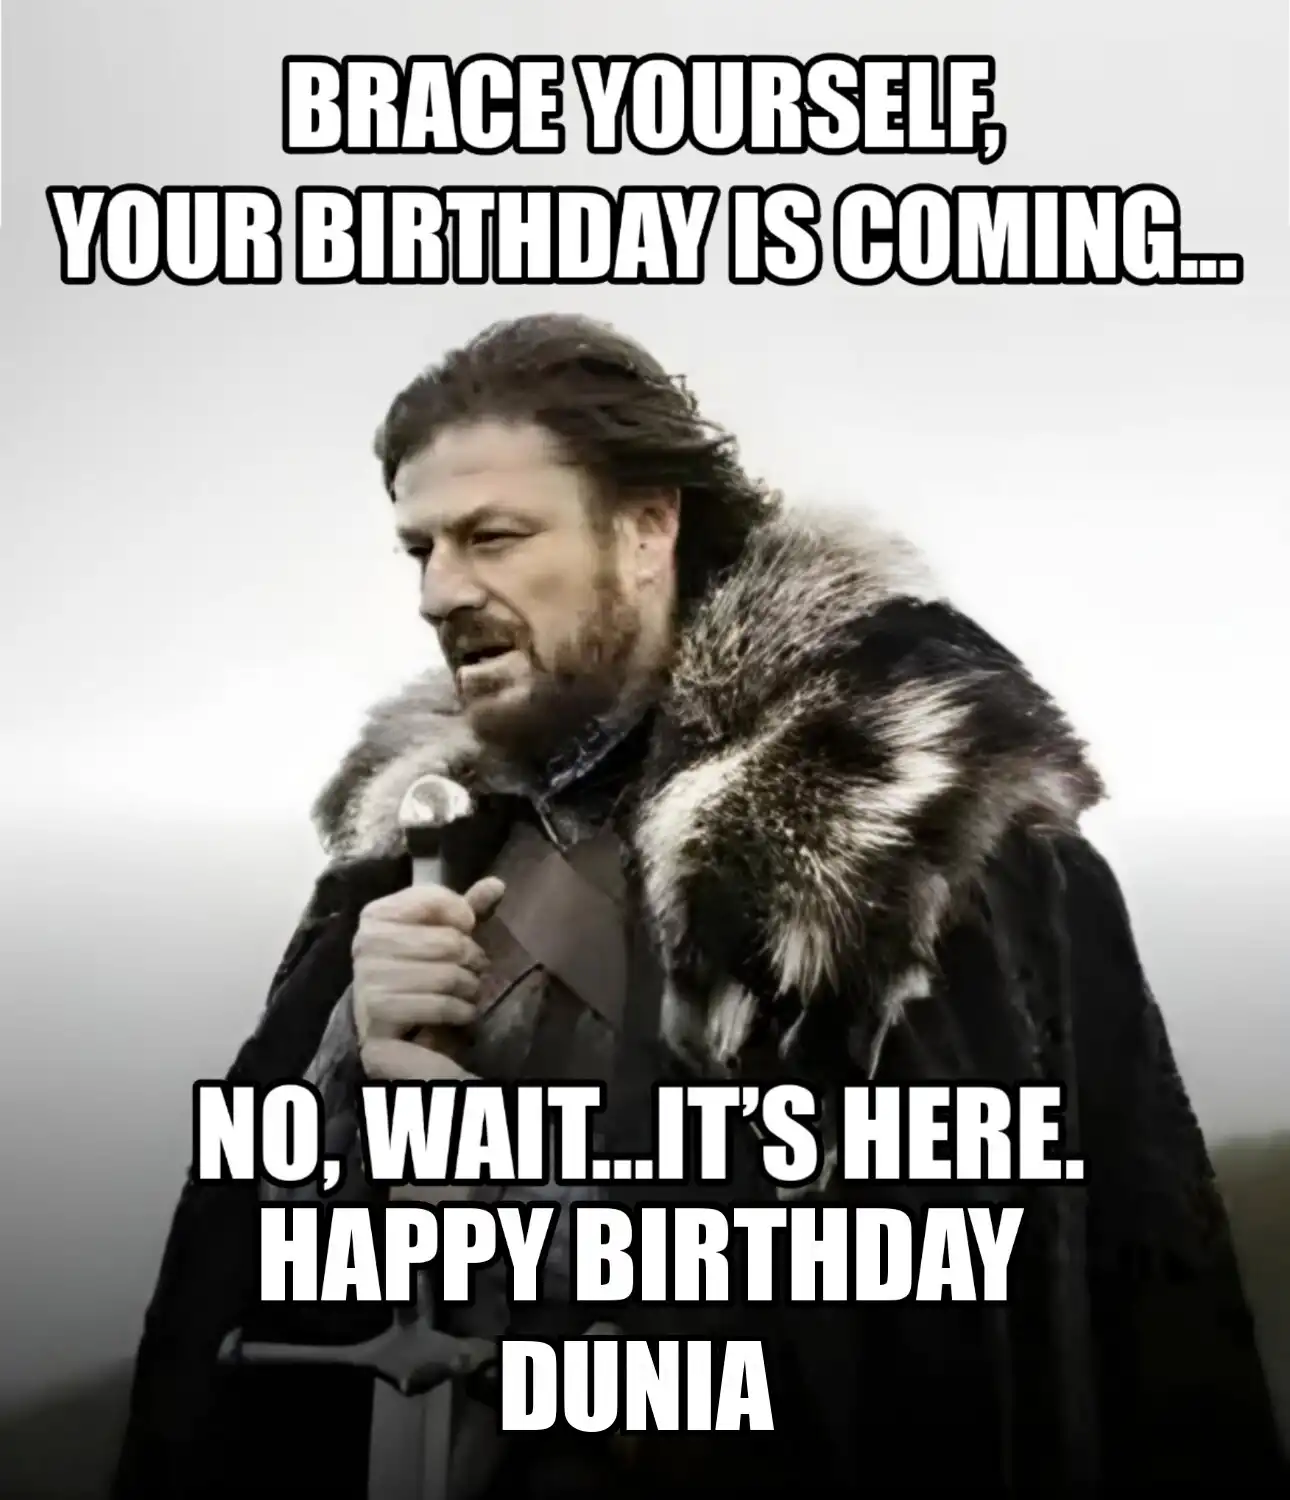 Happy Birthday Dunia Brace Yourself Your Birthday Is Coming Meme